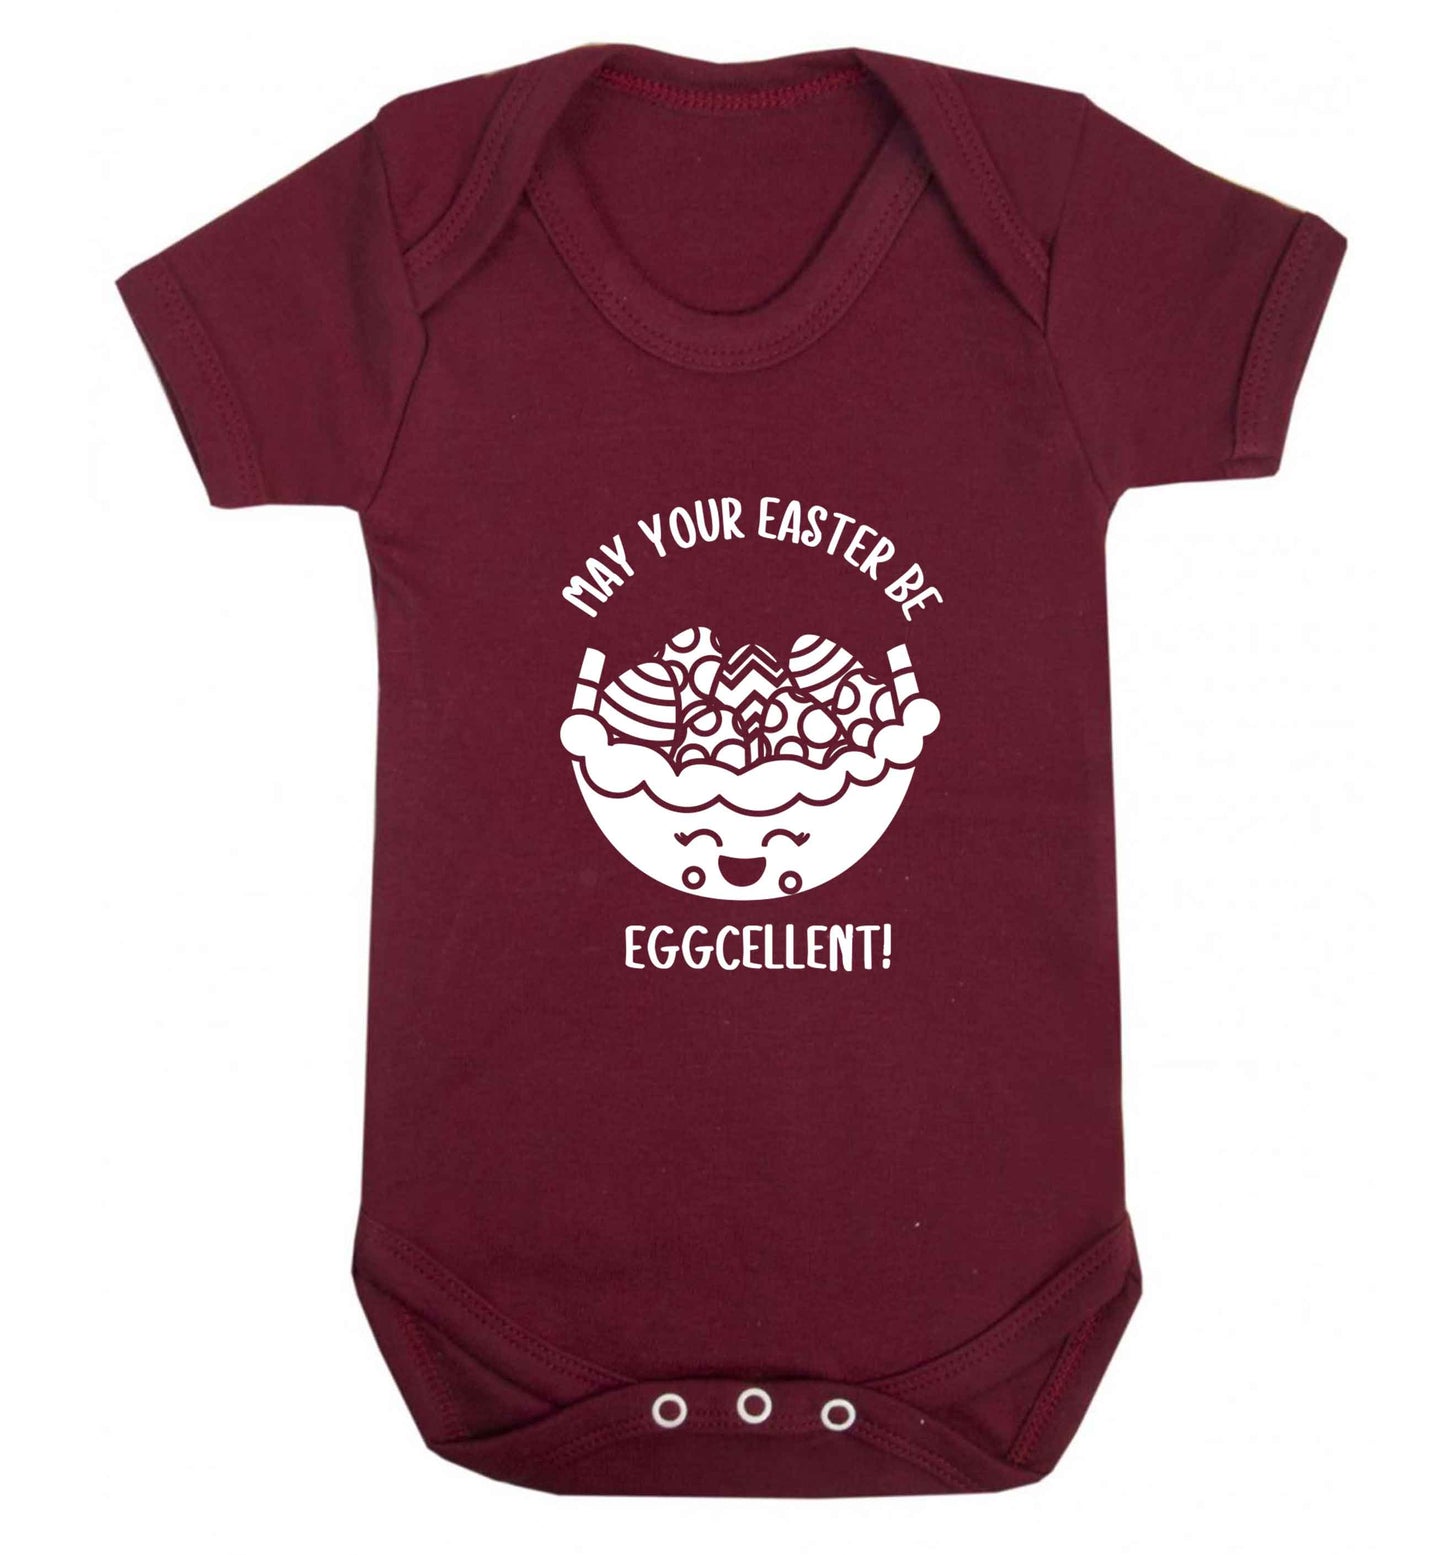 May your Easter be eggcellent baby vest maroon 18-24 months